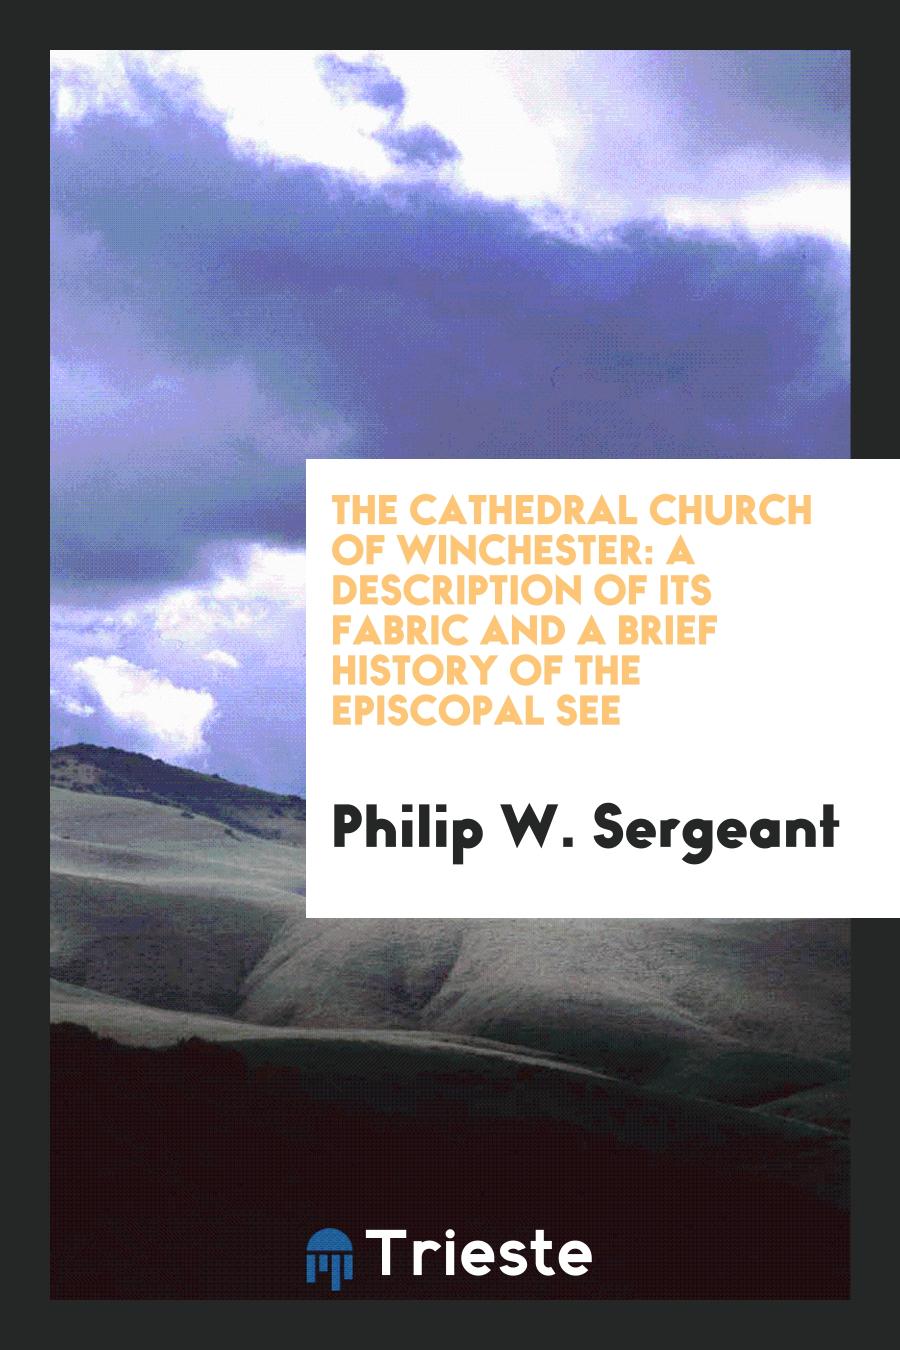 The Cathedral Church of Winchester: A Description of Its Fabric and a Brief History of the Episcopal See